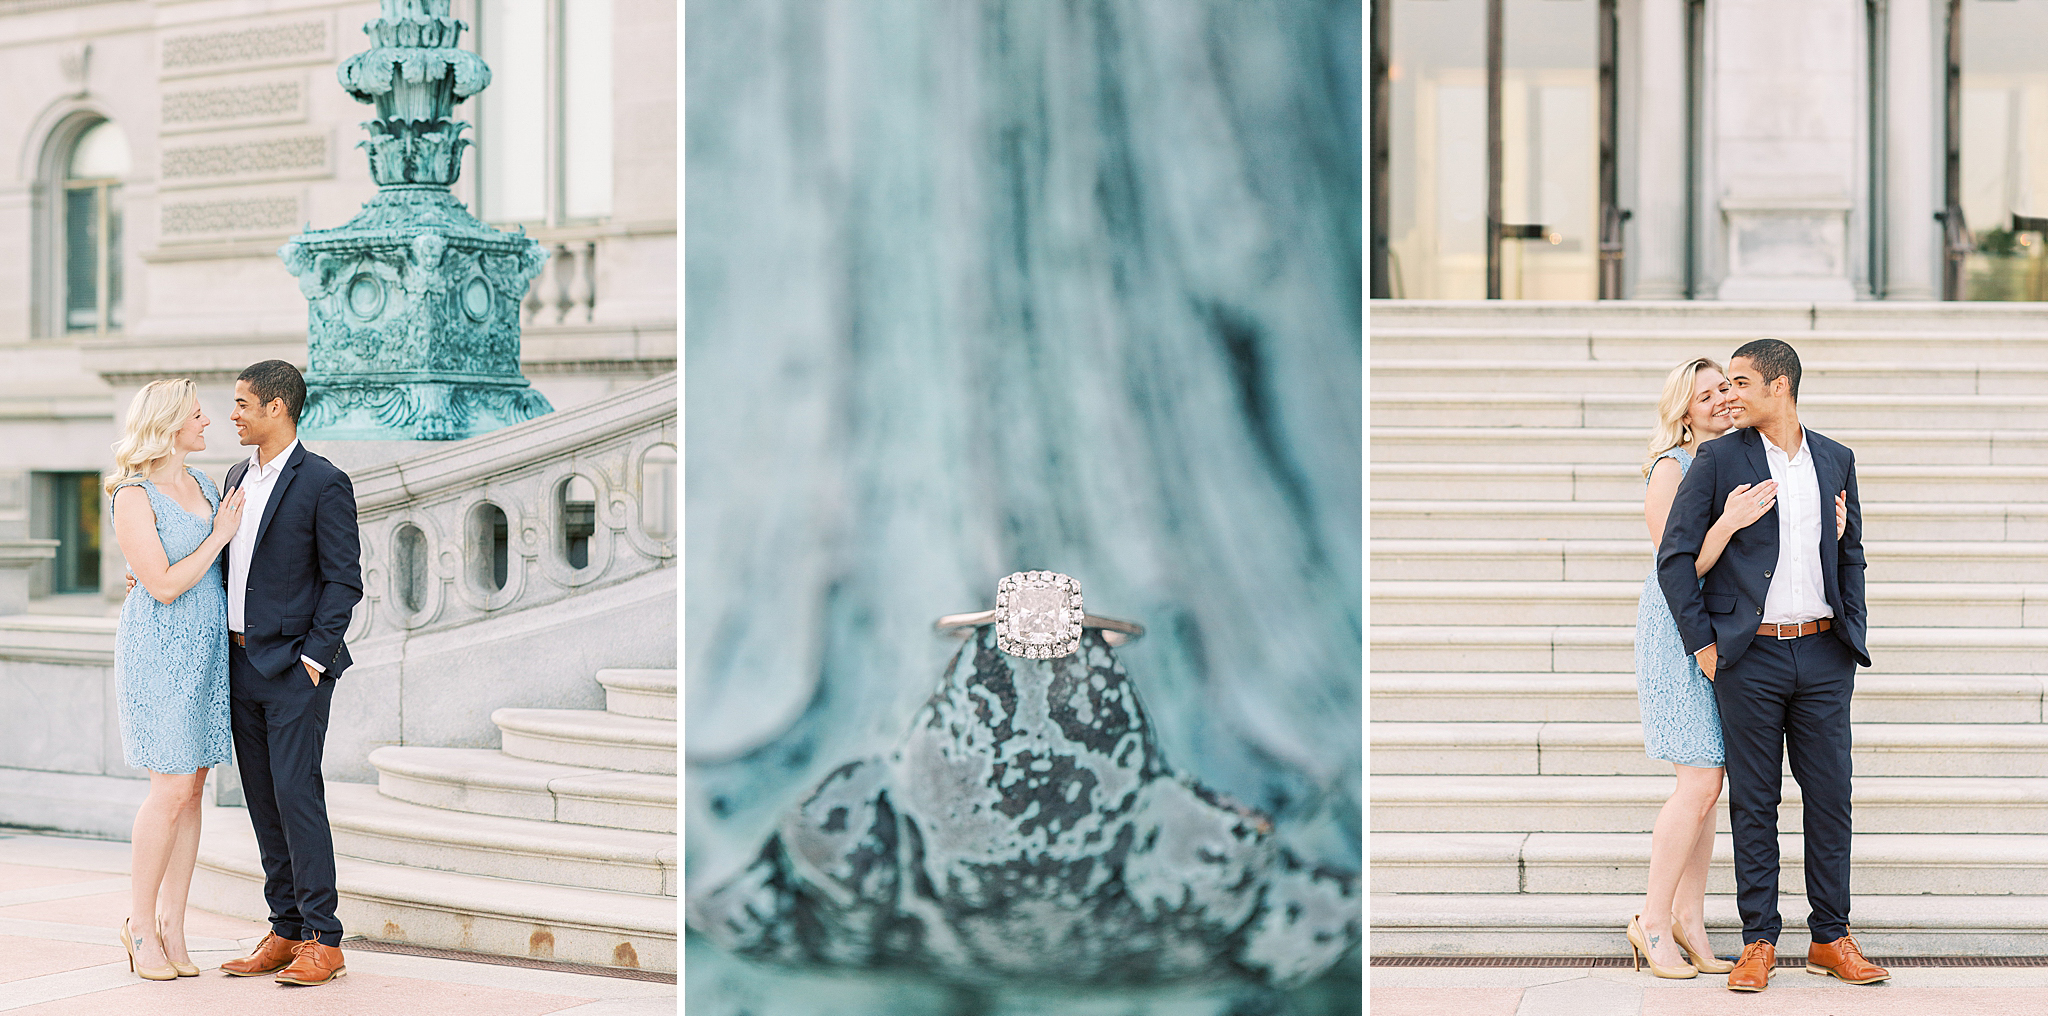 A light-filled summer engagement session in Washington, DC a the US Capitol and Library of Congress.